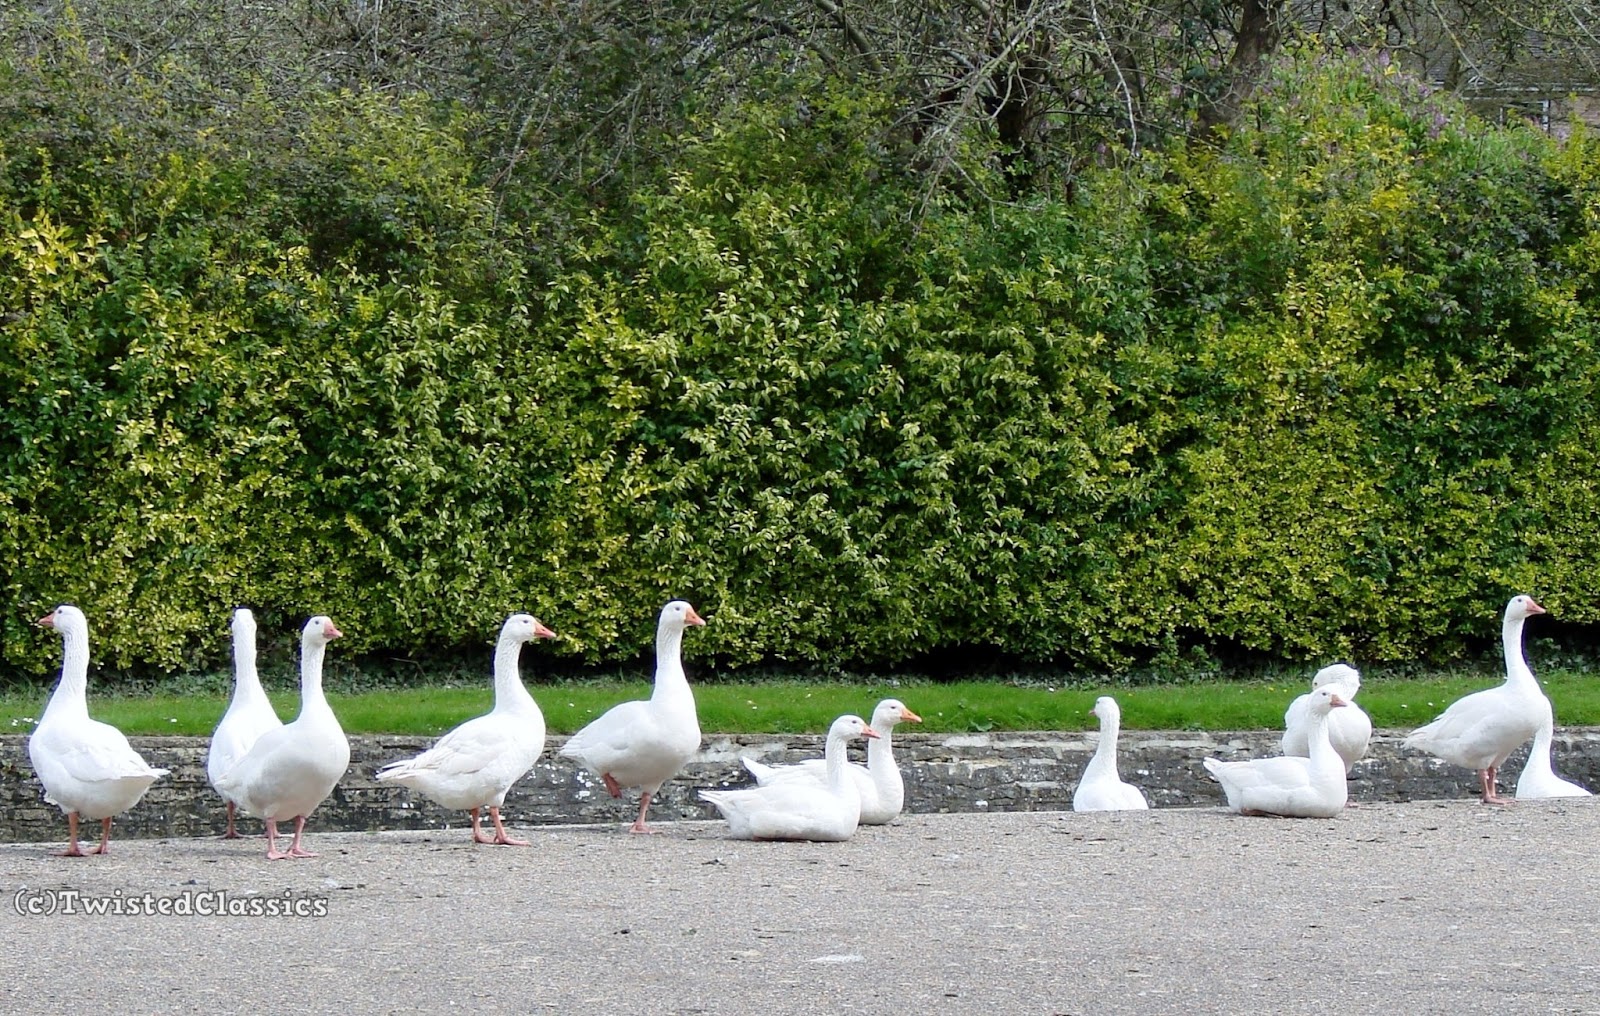 Birds and wildlife: White geese on the Thames